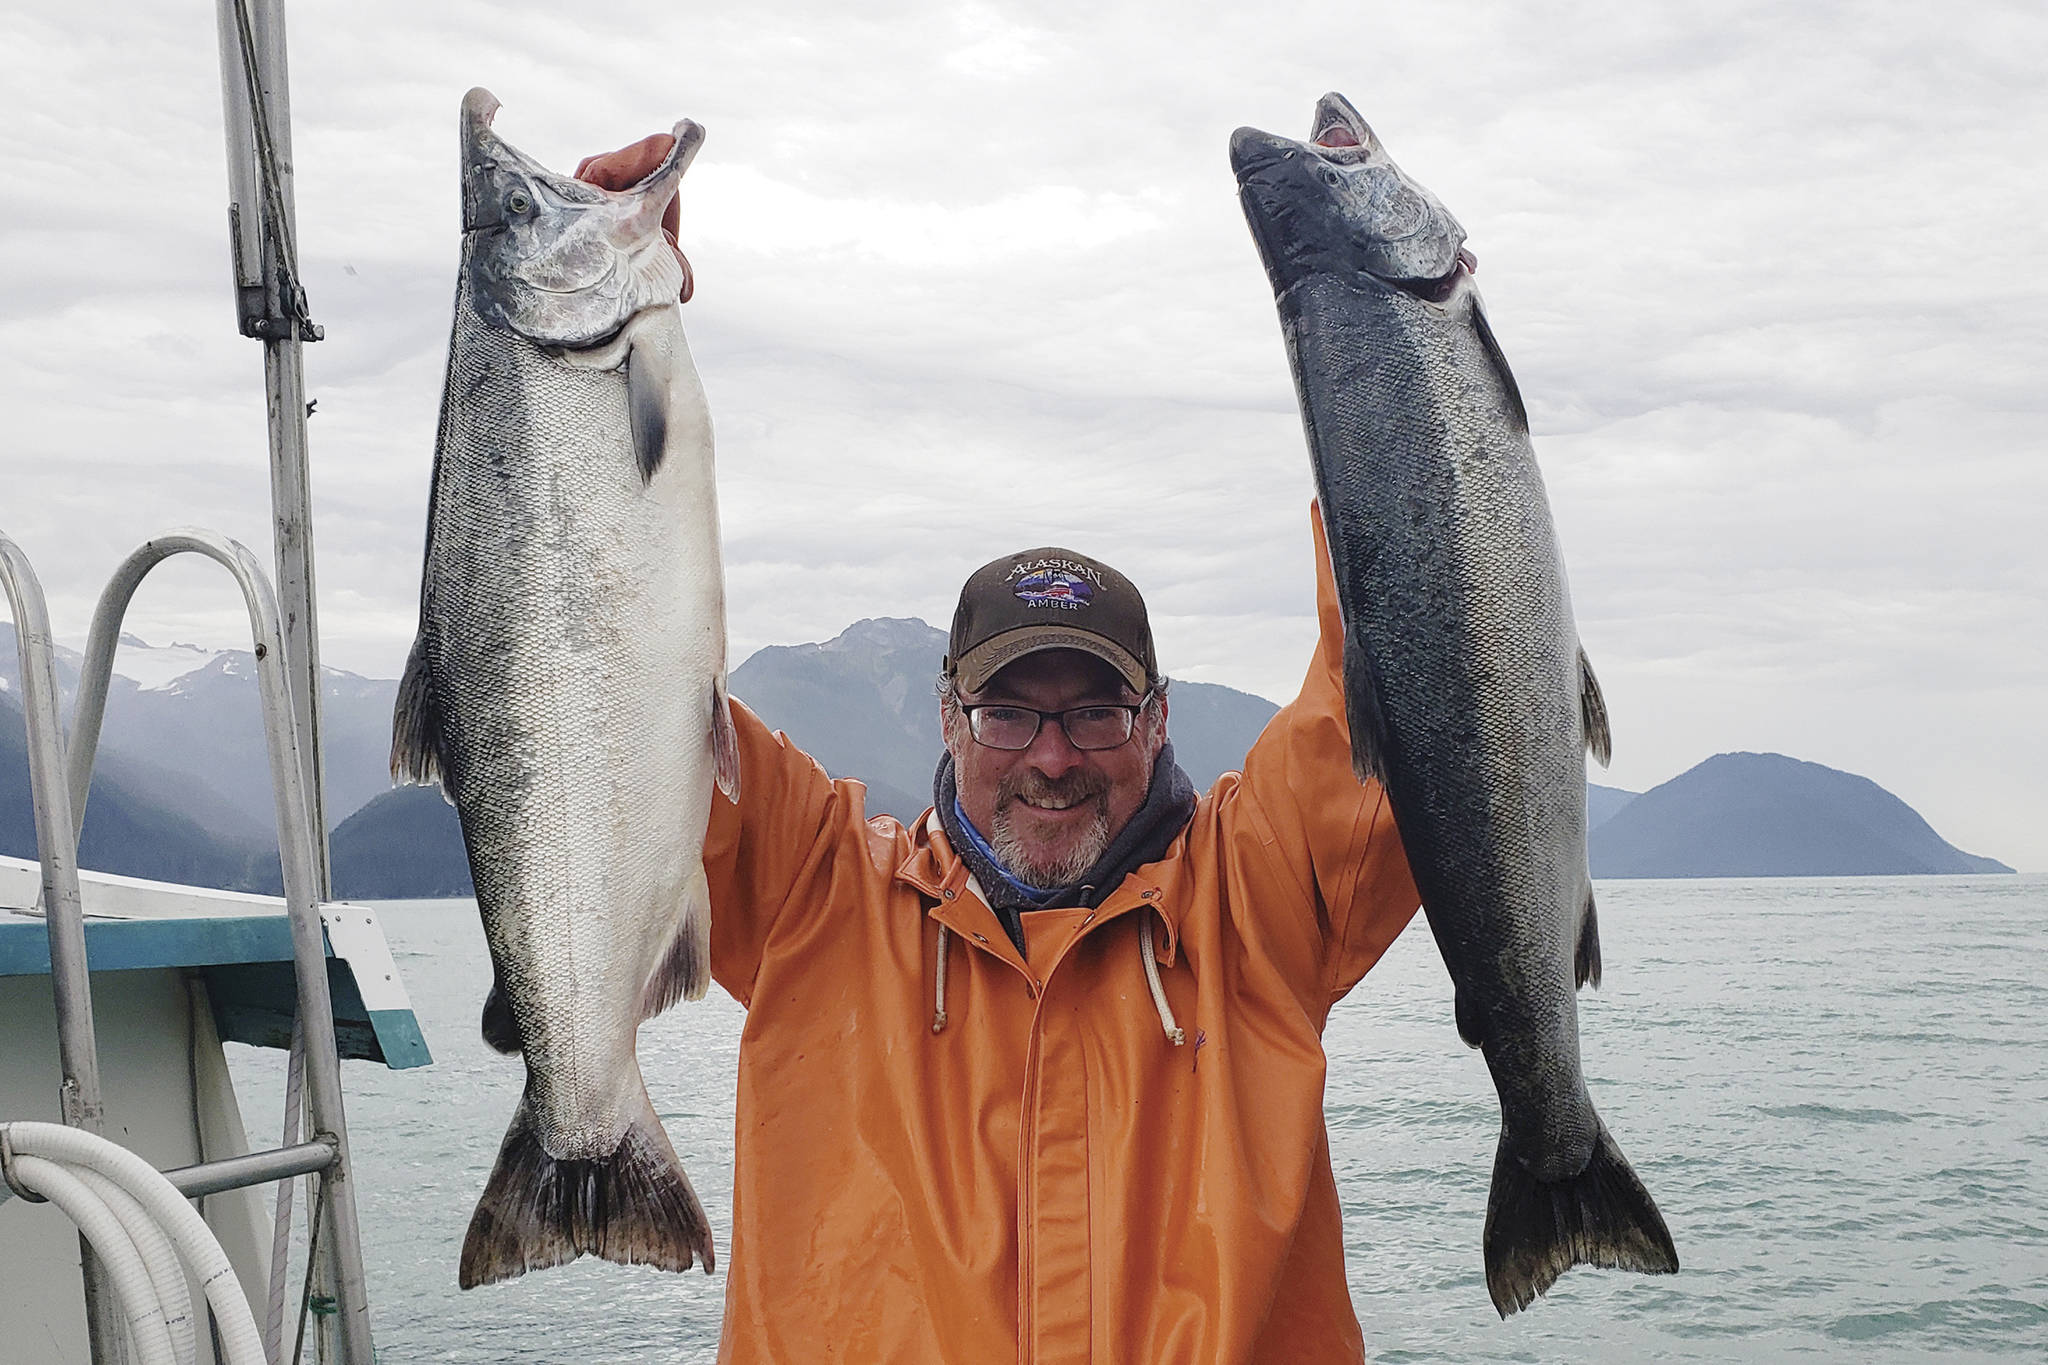 Hank Shaw holds coho salmon caught on the Taku River. Shaw, a hunter, angler, gardener, chef and award-winning writer, is in town this week to promote his new book "Hook, Line and Supper." (Courtesy Photo / Holly A. Heyser)